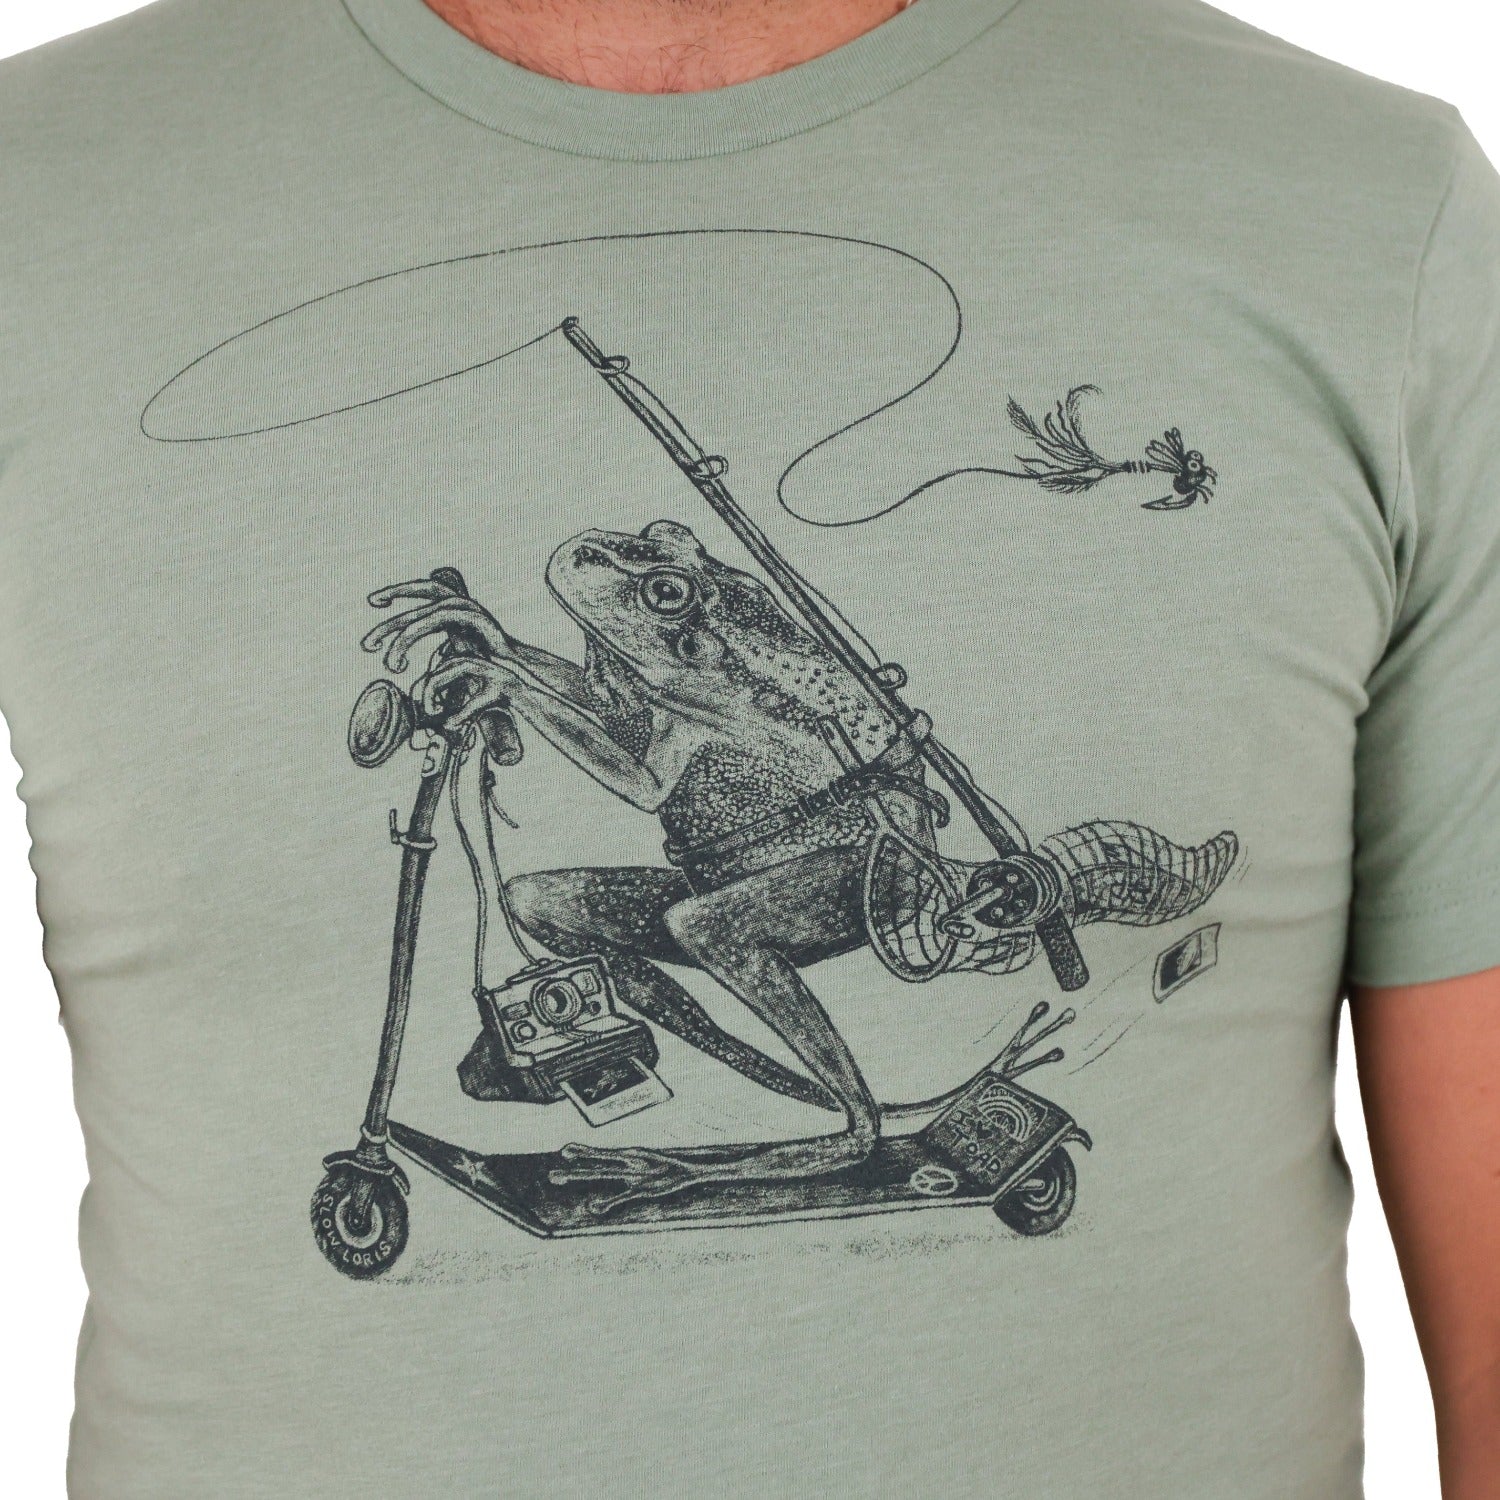 man torso wearing green shirt with print of a frog riding a scooter with a fly fishing rod, net, polaroid camera